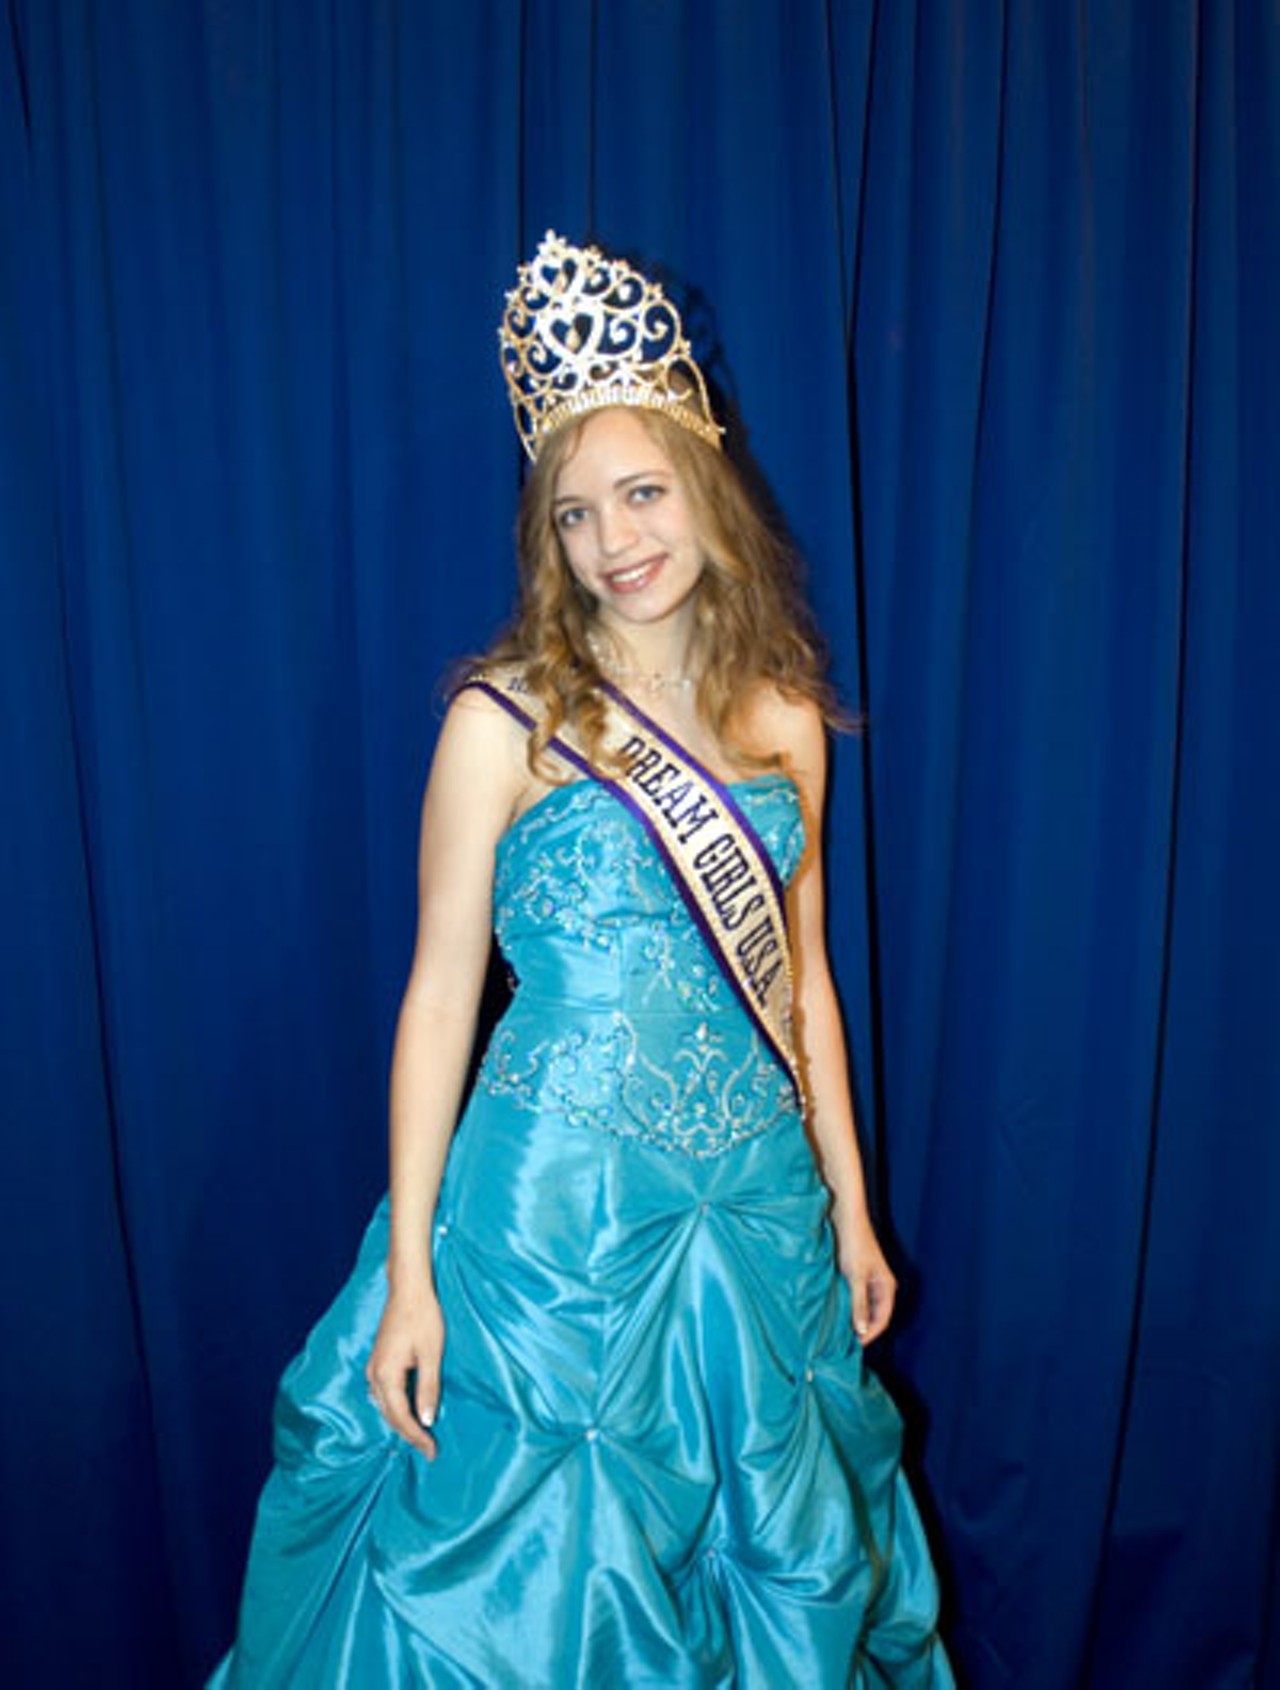 Chrystaline Angel Decker from Michigan is the daughter of April Decker, state pageant director for Michigan, making her a National Lifetime Queen according to the Dream Girls USA ranks.